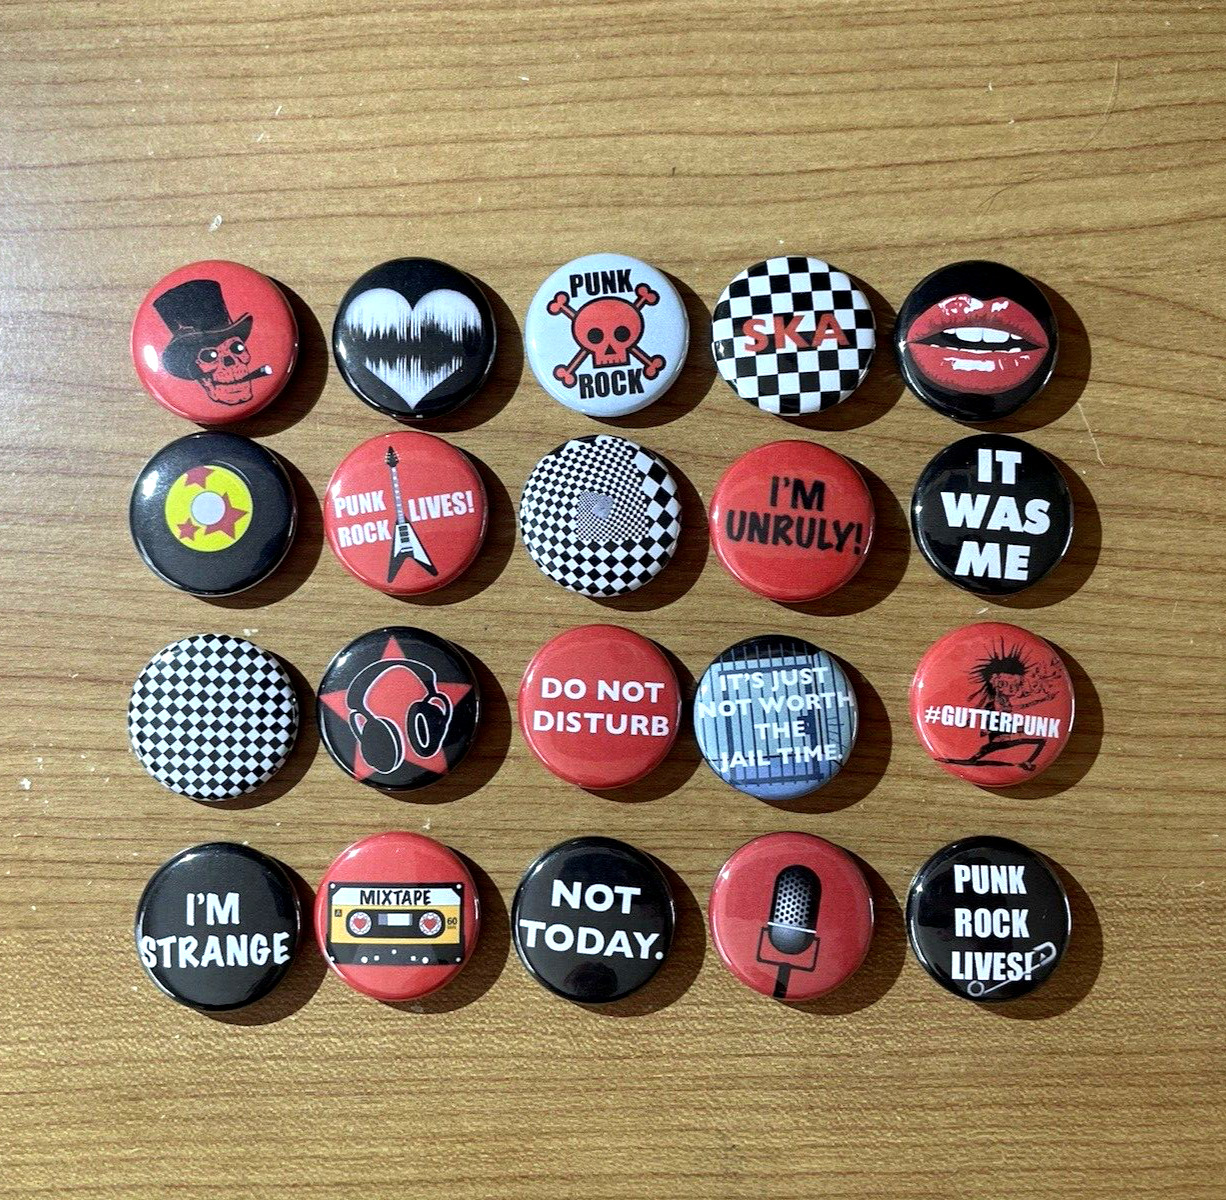 20 Punk Ska Sarcastic Music Buttons Pins 80's 90's Vintage Style Band 1